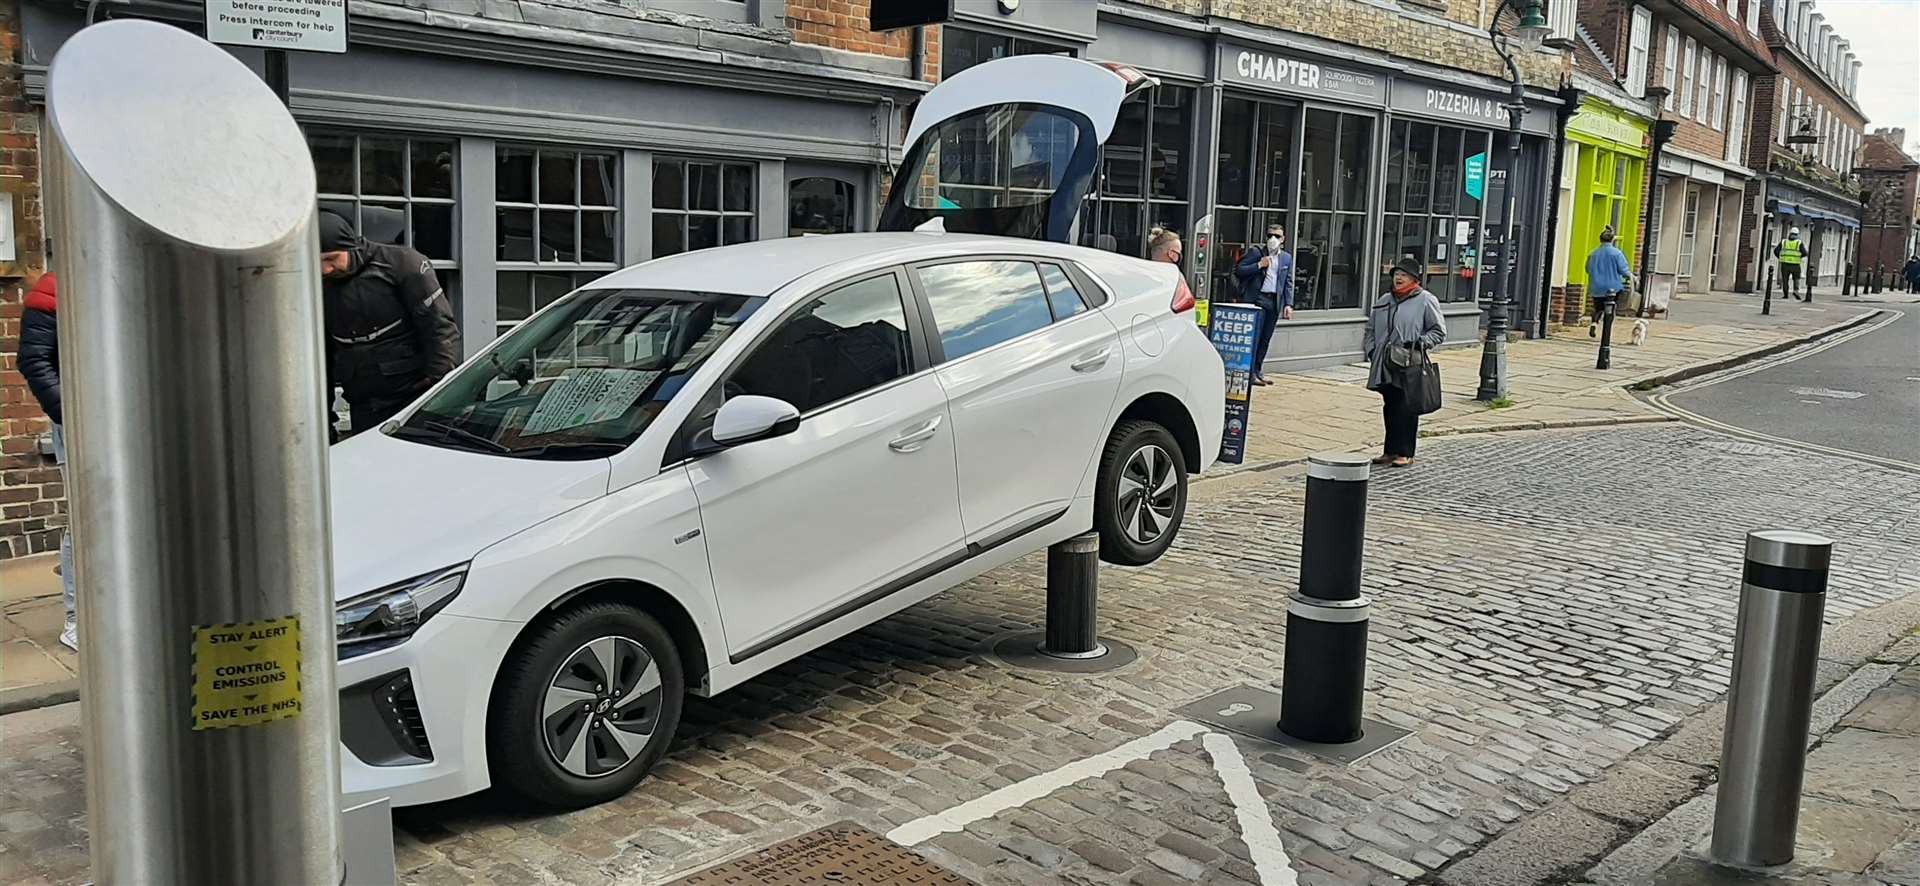 The Hyundai trapped on top of an anti-terror bollard. Picture: Andrew Corby